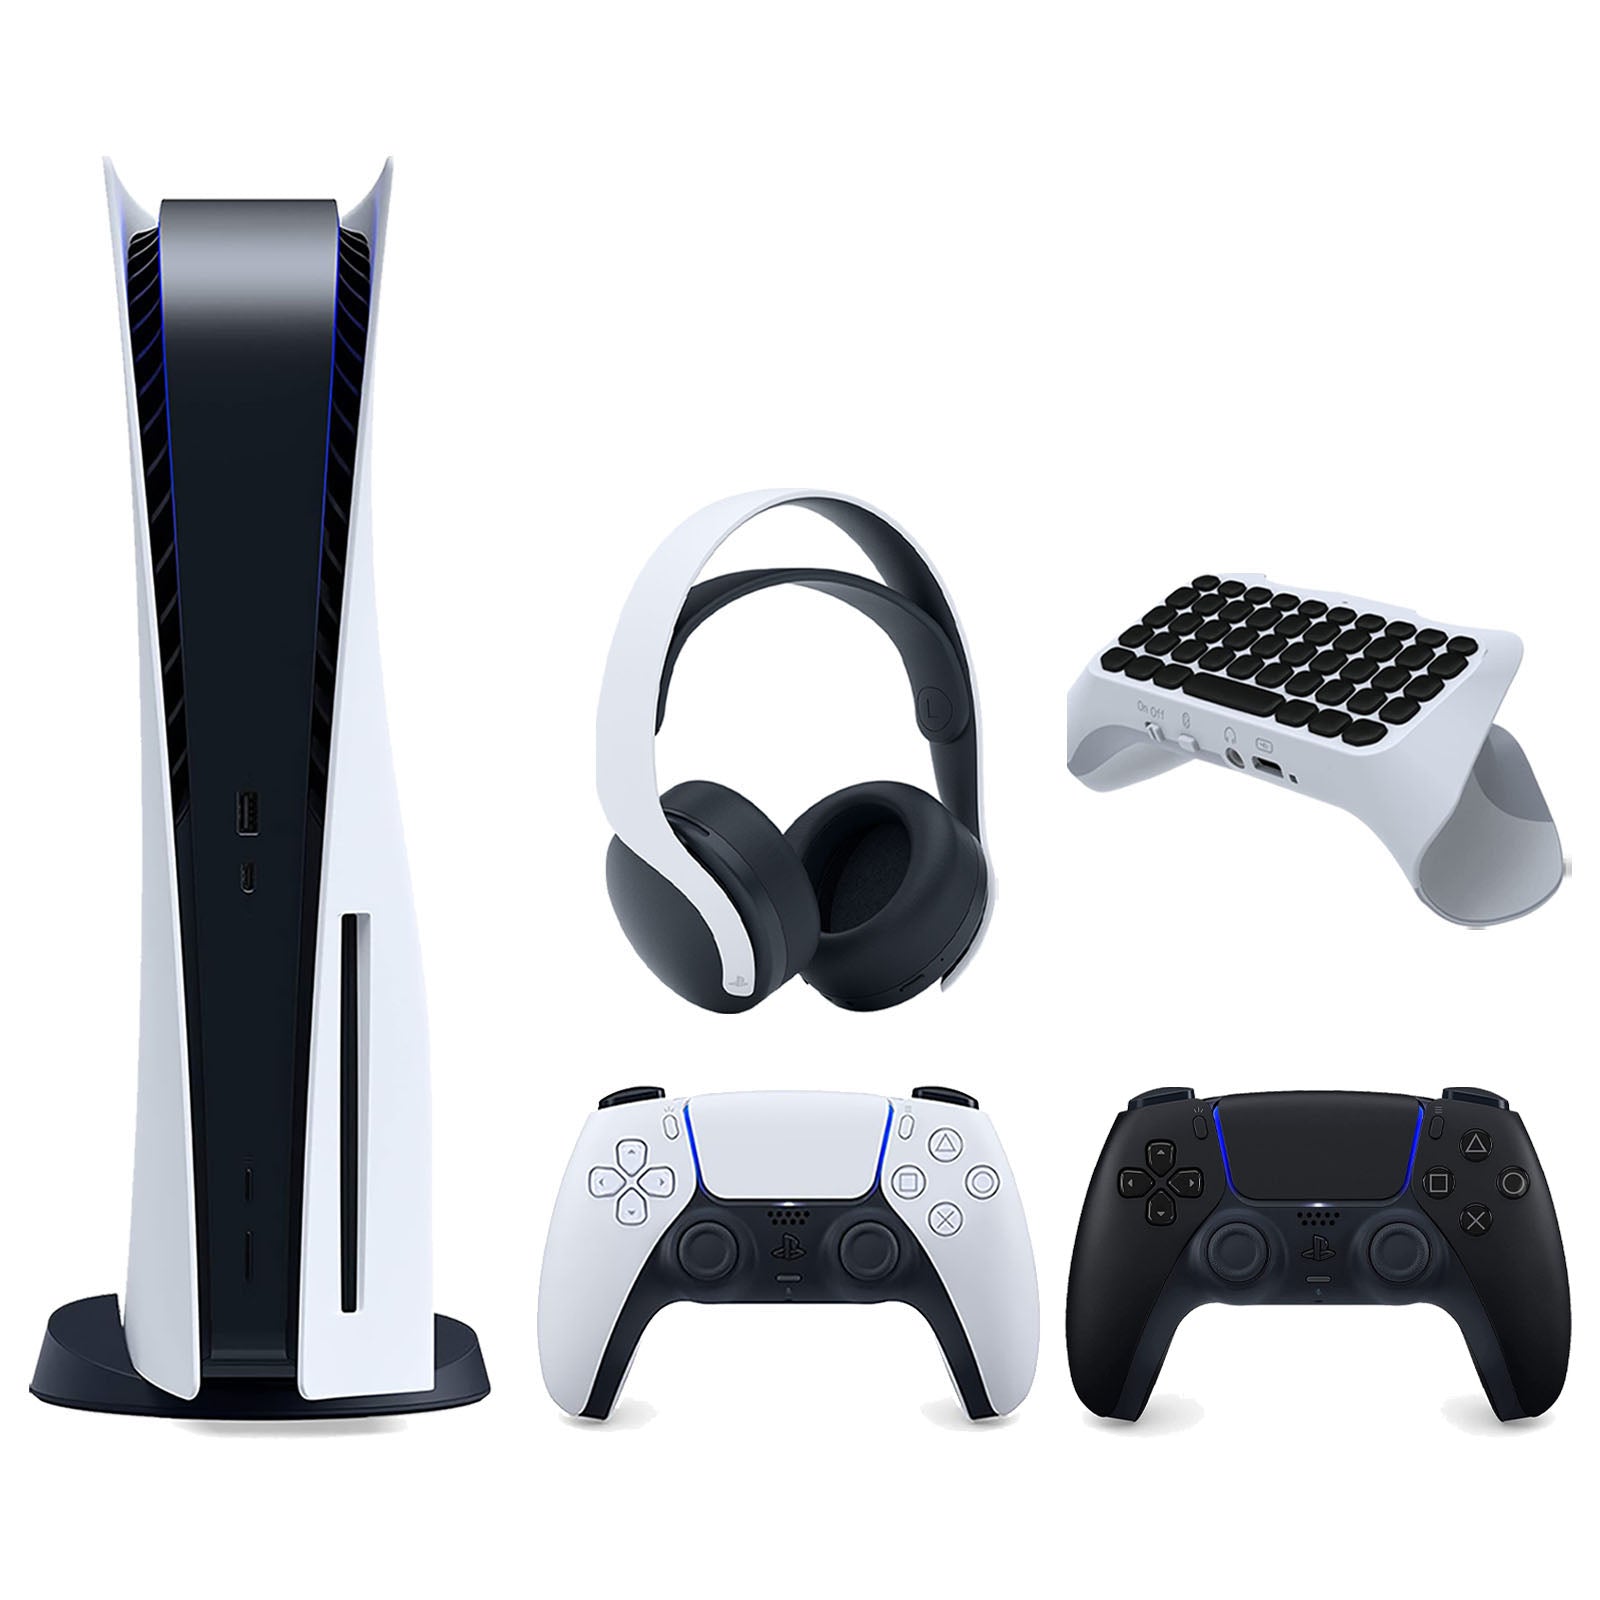 Sony Playstation 5 Disc Version Console with Extra Black Controller, White PULSE 3D Headset and Surge QuickType 2.0 Wireless PS5 Controller Keypad Bundle - Pro-Distributing